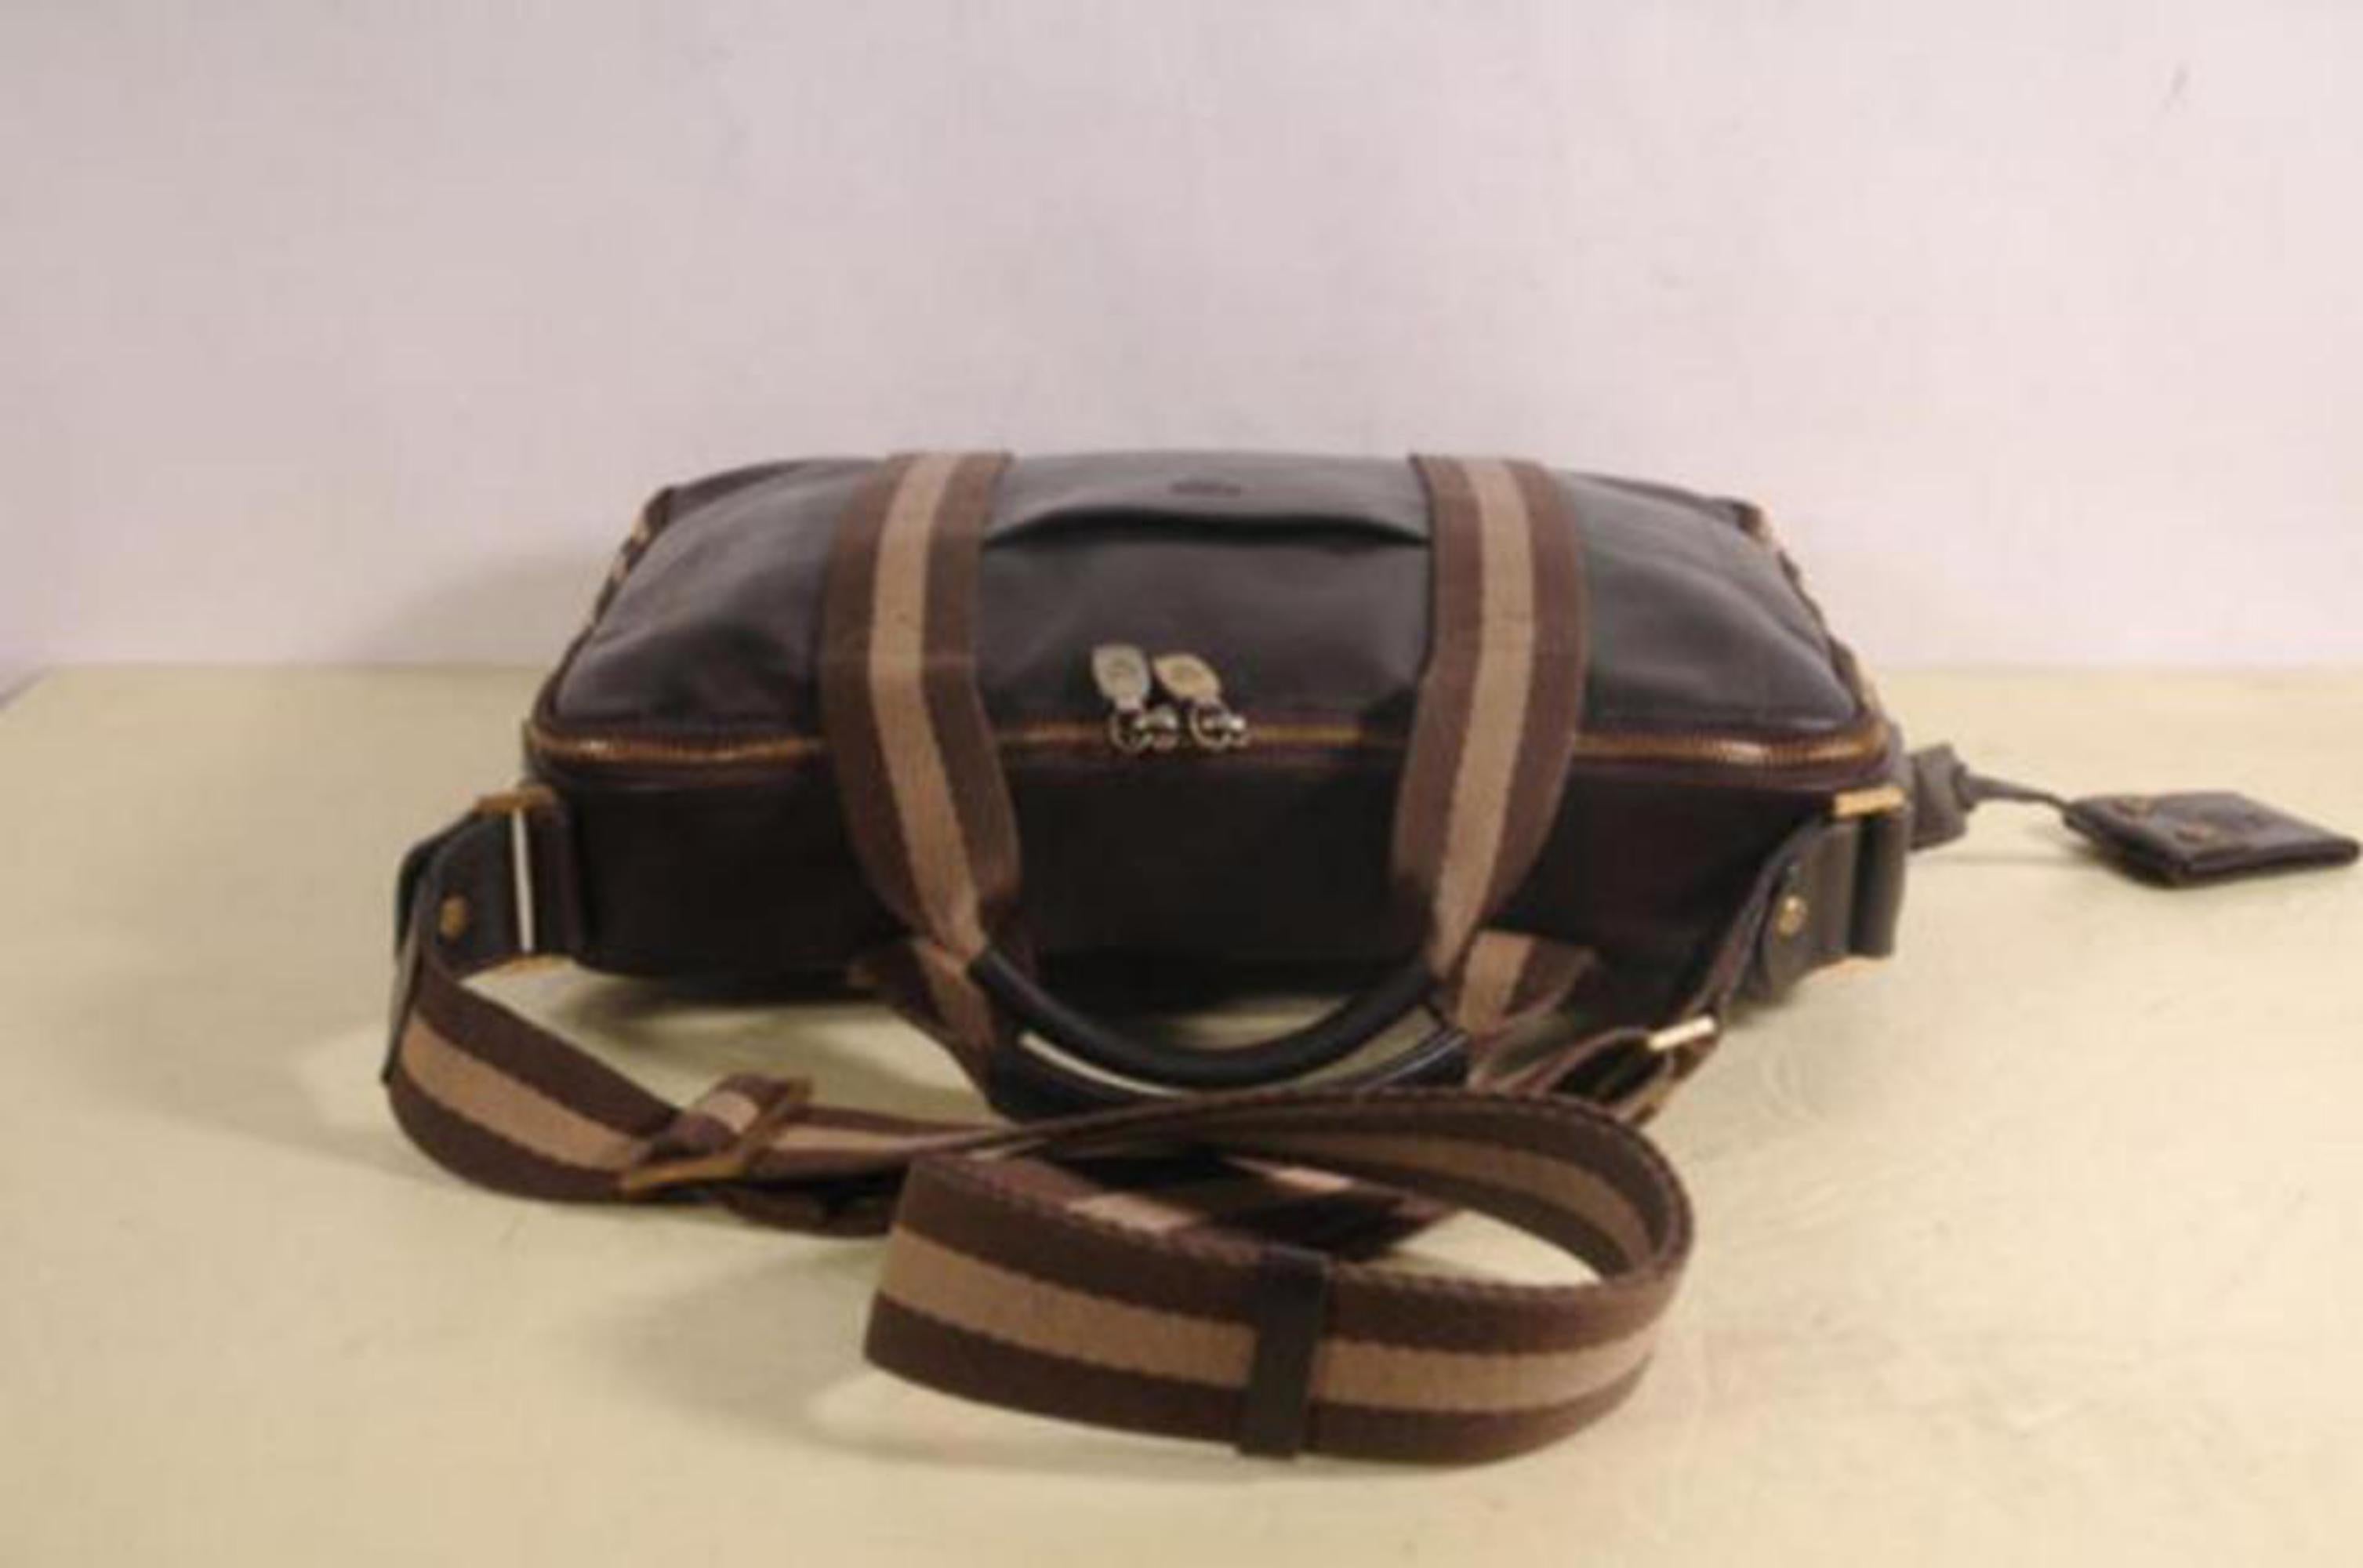 MCM 2way Briefcase 869708 Brown Leather Messenger Bag In Good Condition For Sale In Forest Hills, NY